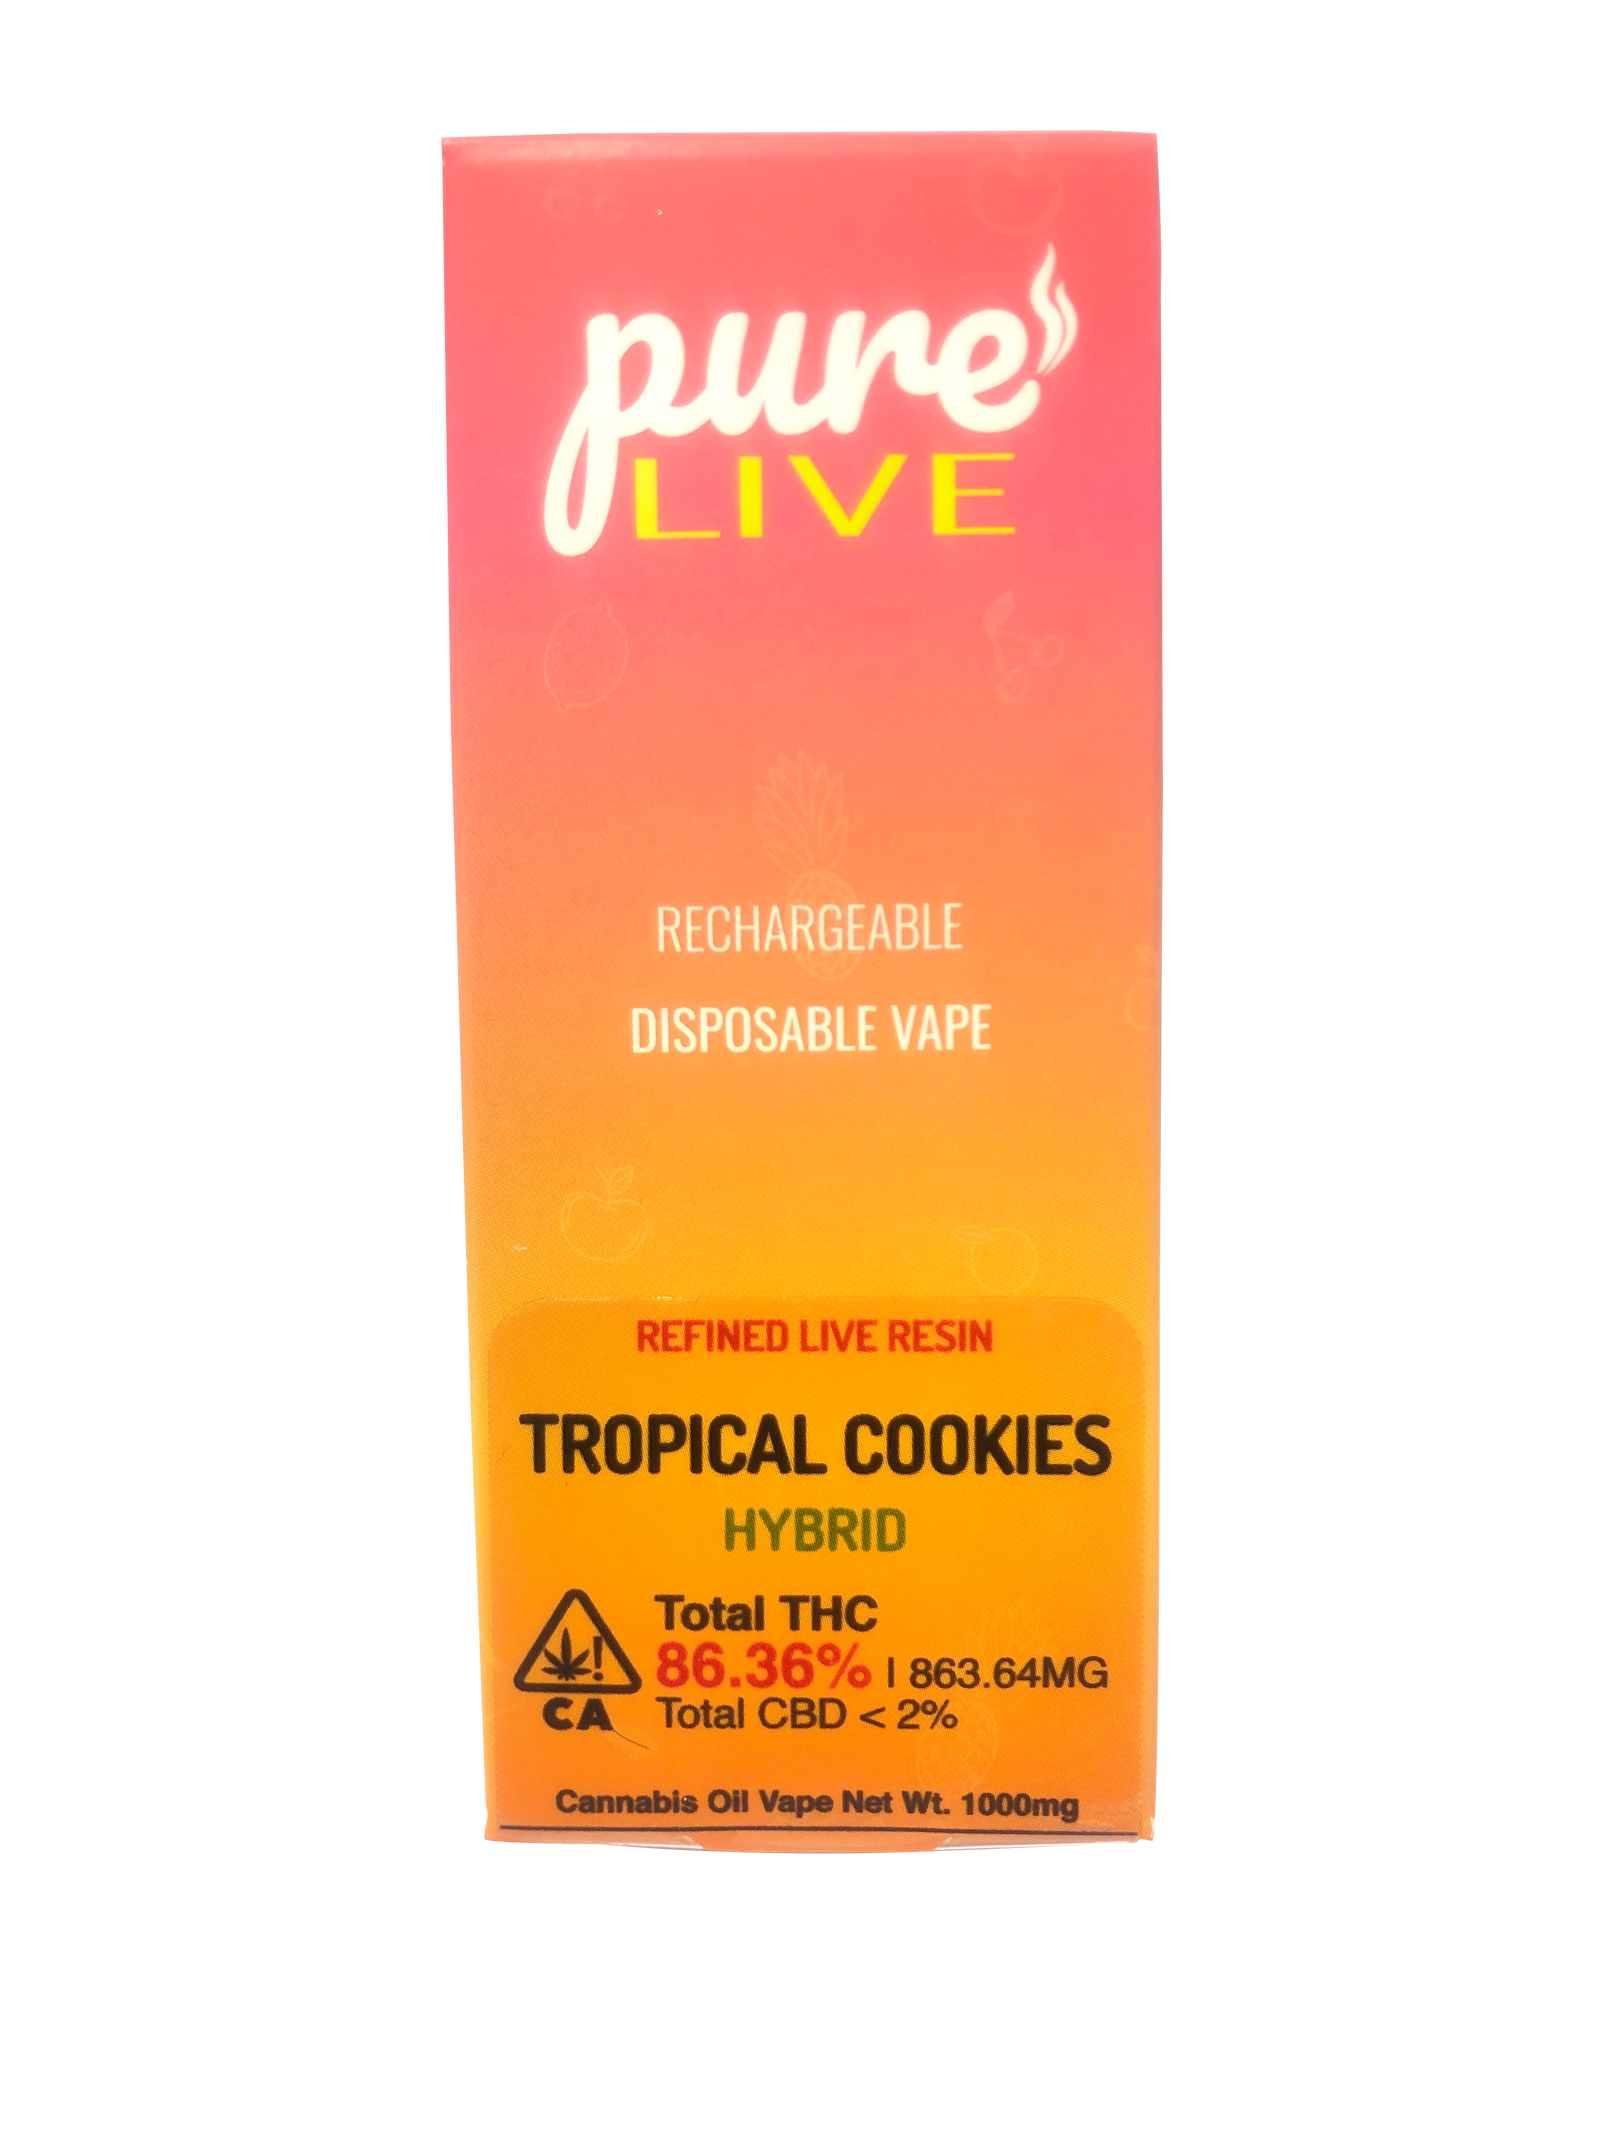 Pure Live Full Spectrum Refined Live Resin 1G Disposable Vape - Tropical Cookies - The Balloon Room